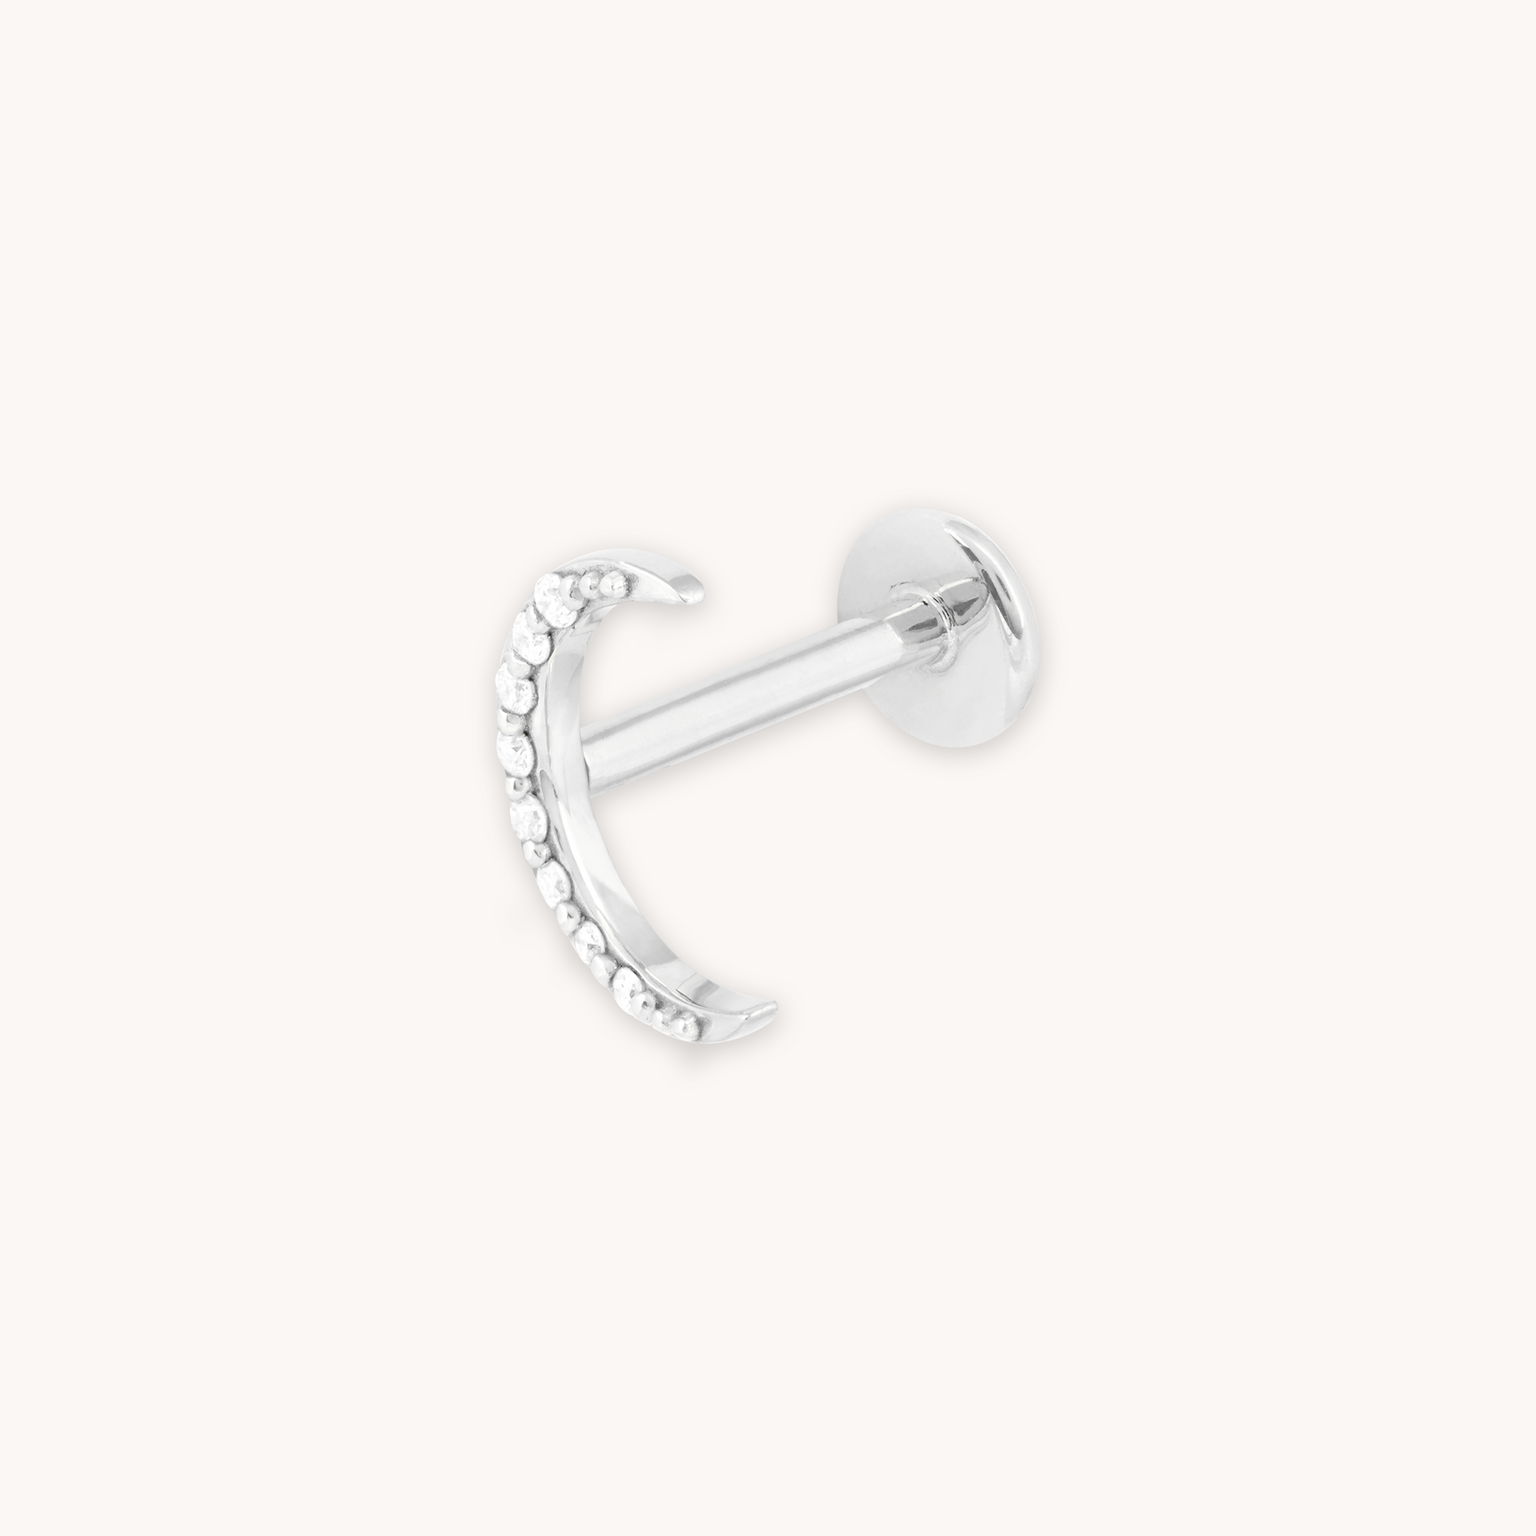 Solid White Gold Topaz Moon Piercing Stud